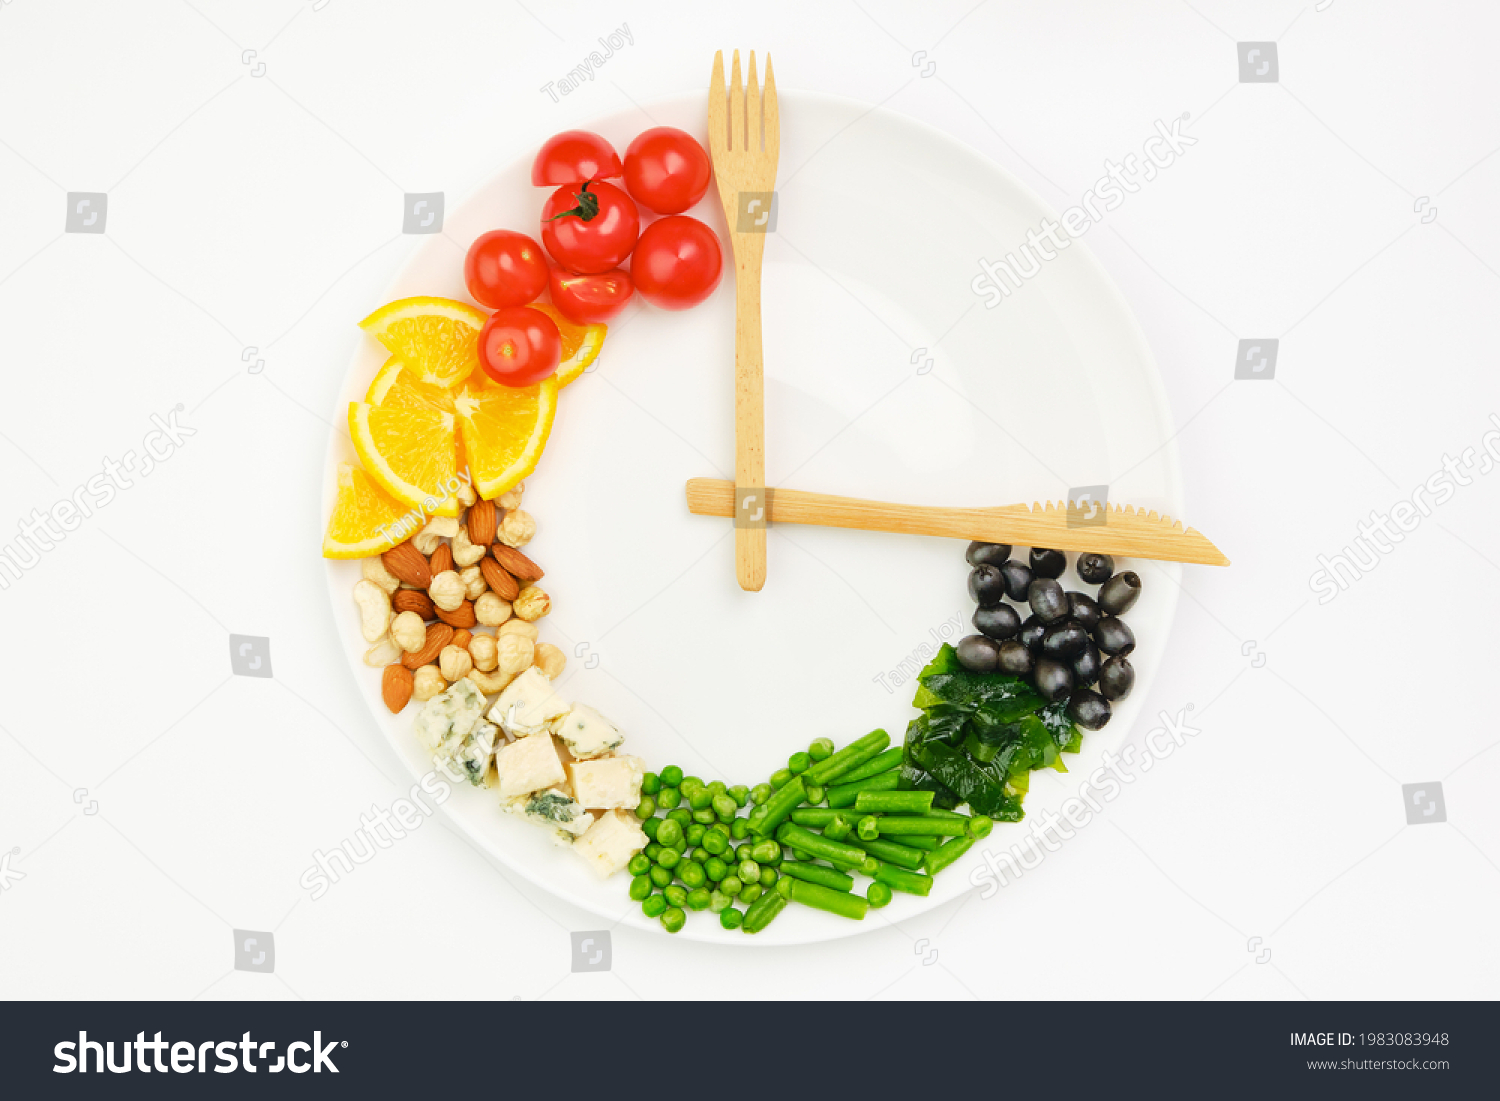 Colorful food and cutlery arranged in the form of a clock on a plate. Intermittent fasting, diet, weight loss, lunch time concept. #1983083948